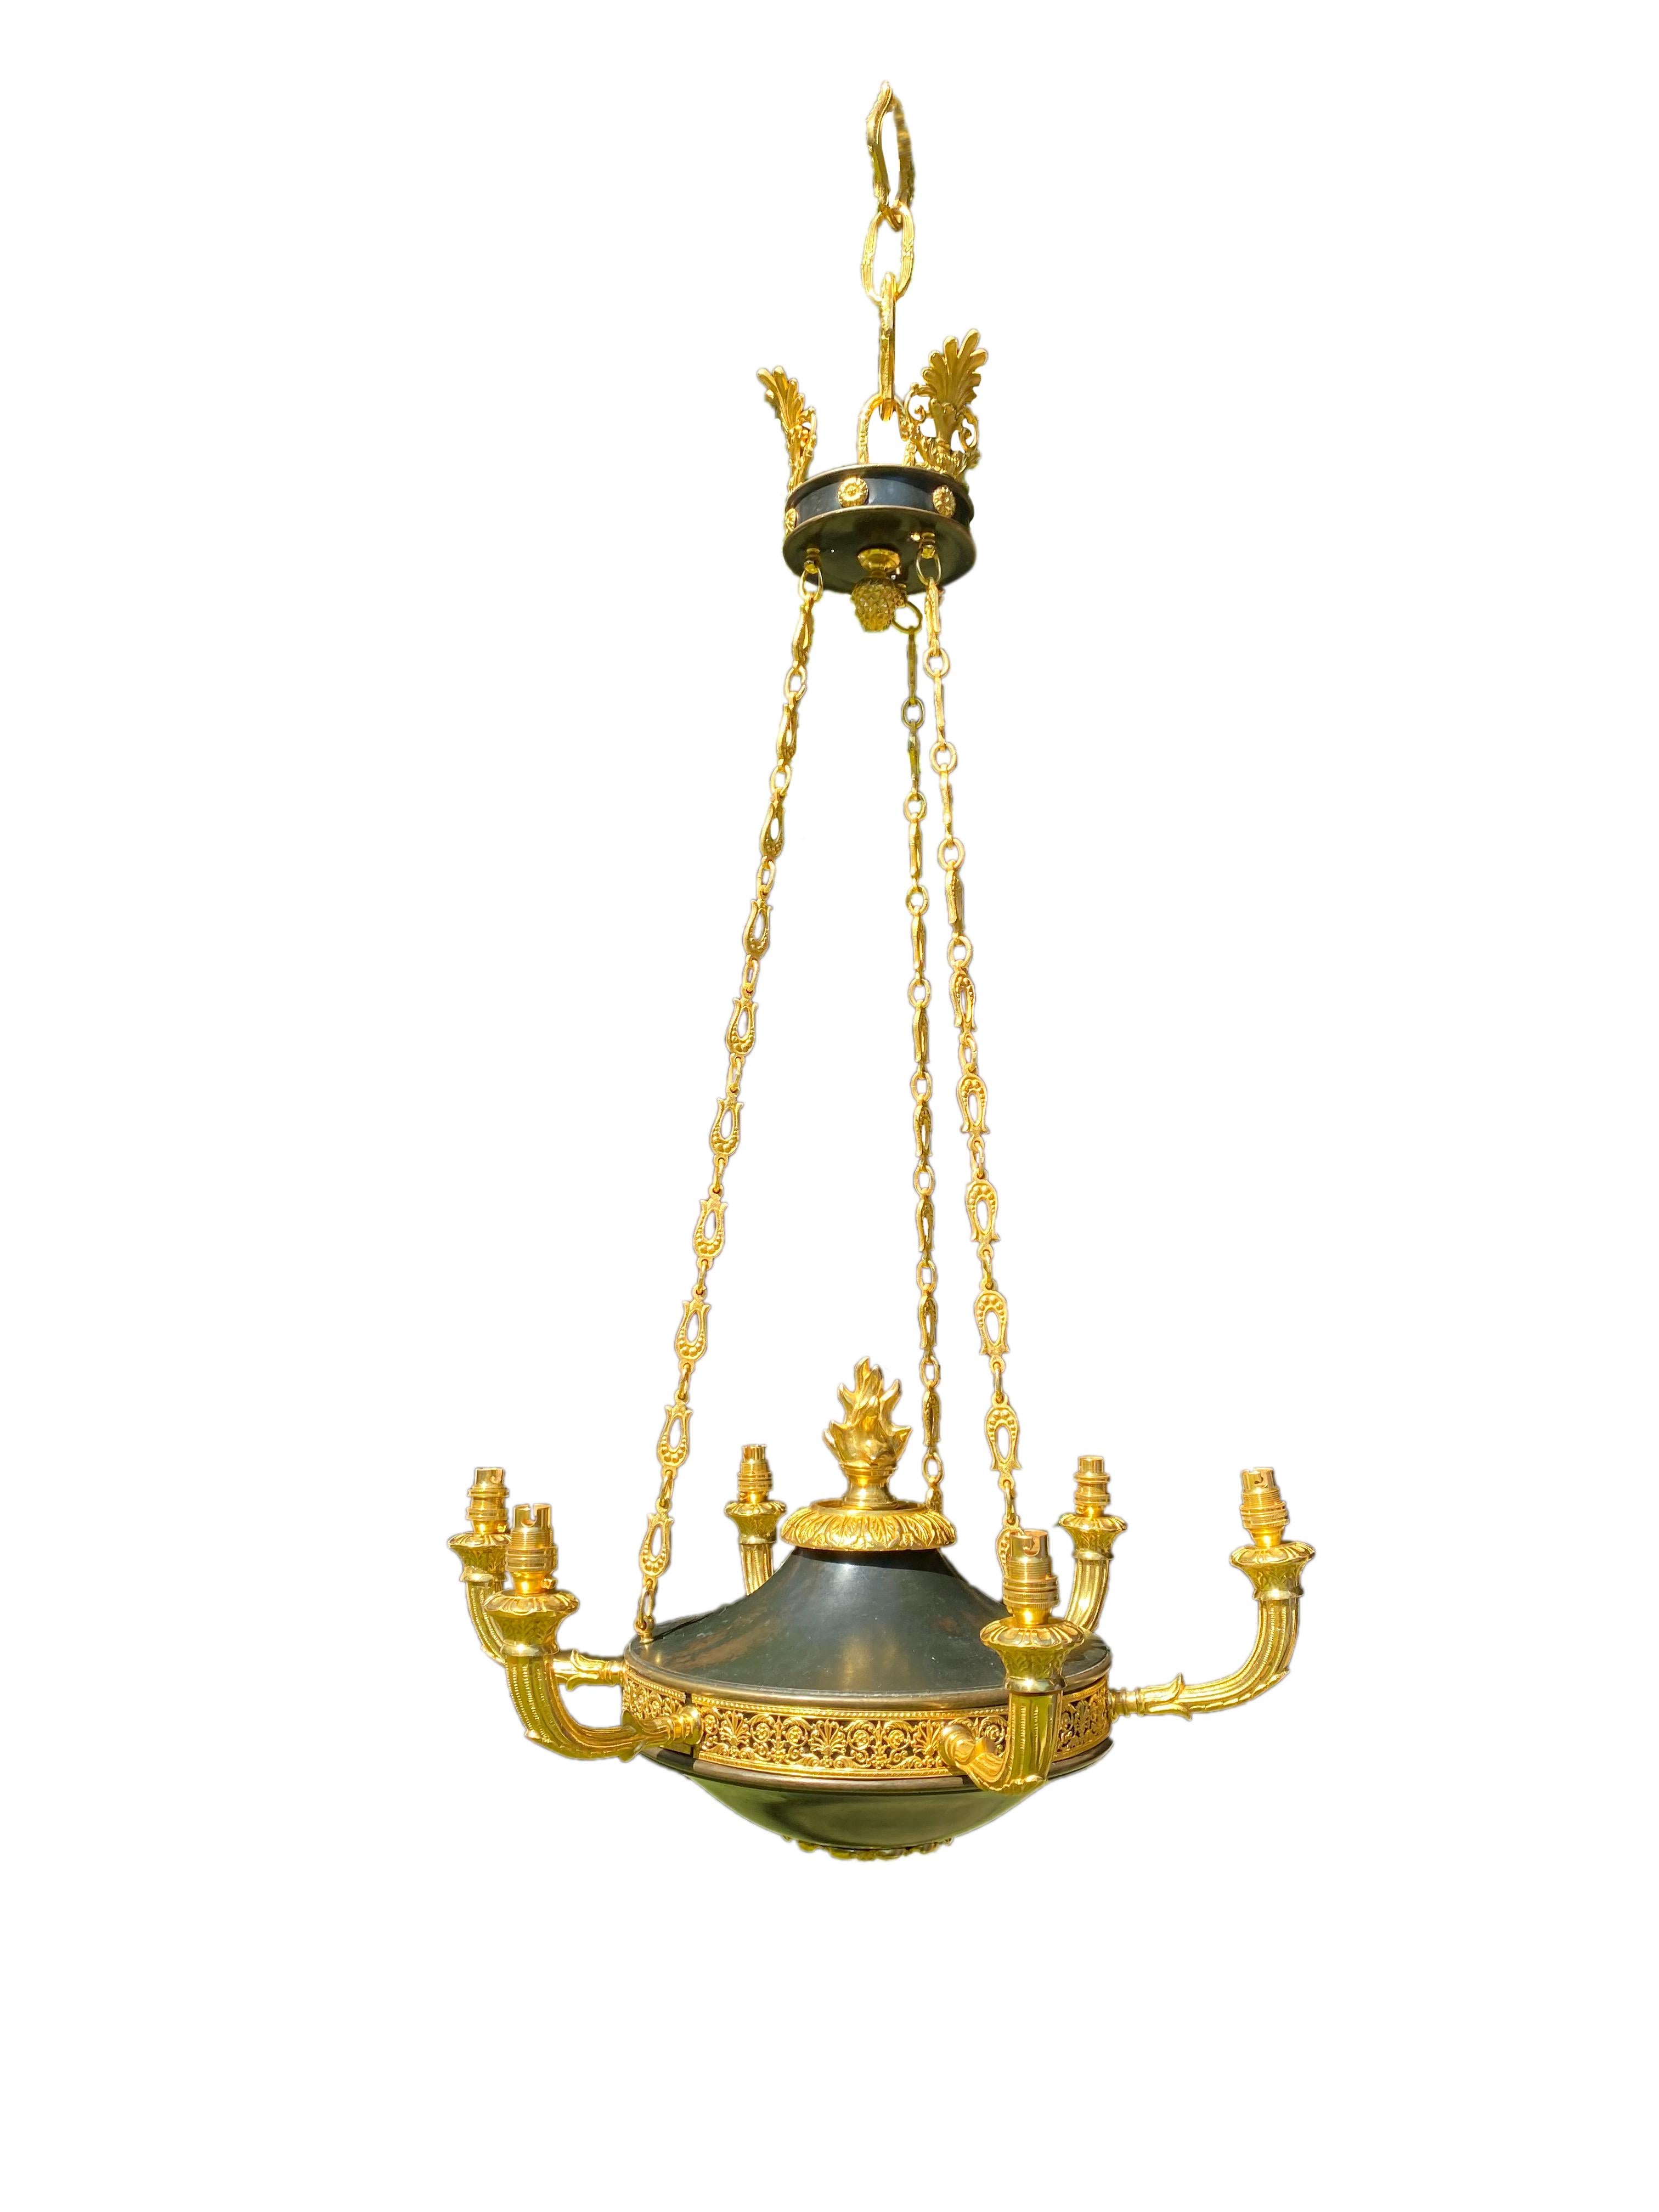 Splendid late 19th century French Empire gilt bronze and tole chandelier having a coronet with chains hanging down to the chandelier that has six branch sconces, and a flame to the centre and classical finial to the upside.